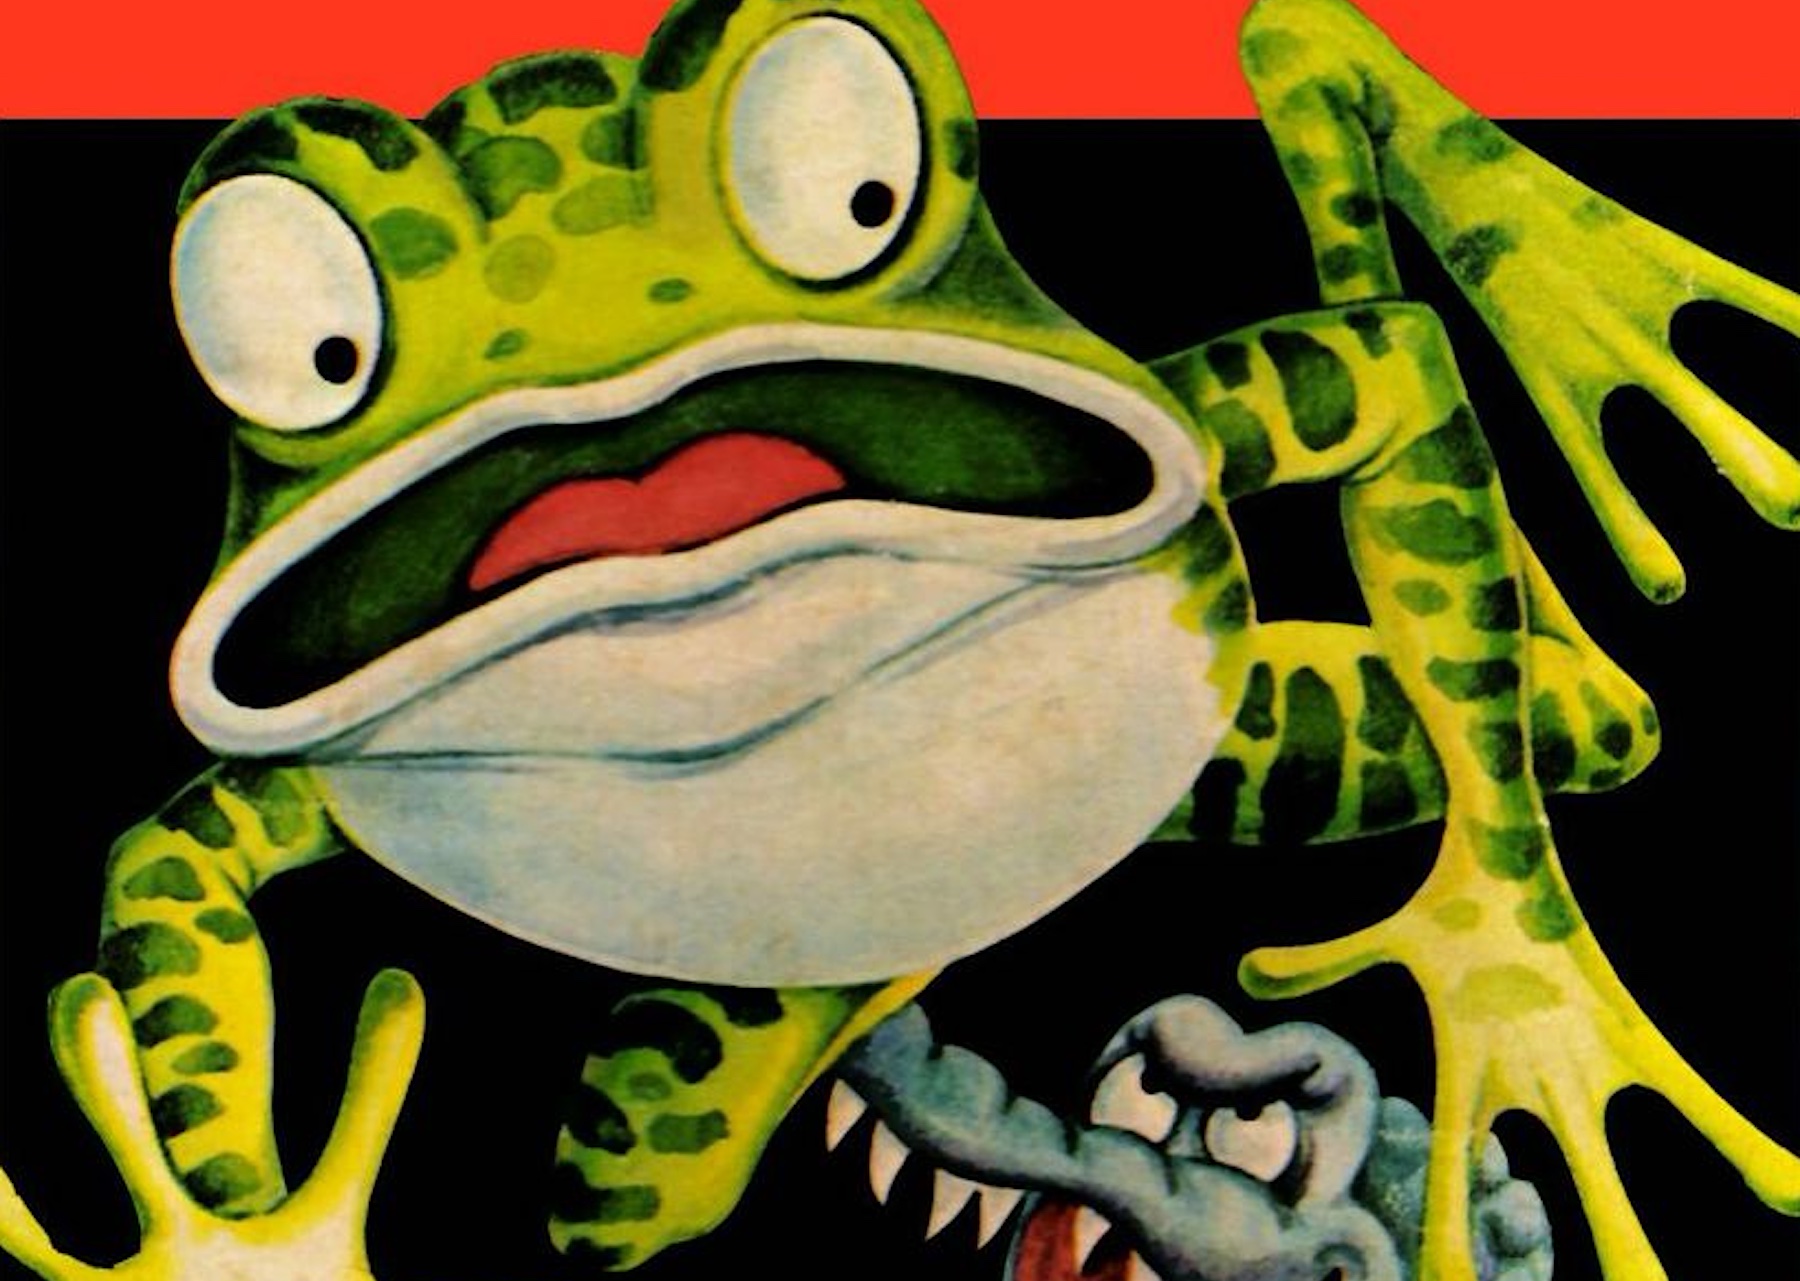 Konami is turning Frogger into a game show